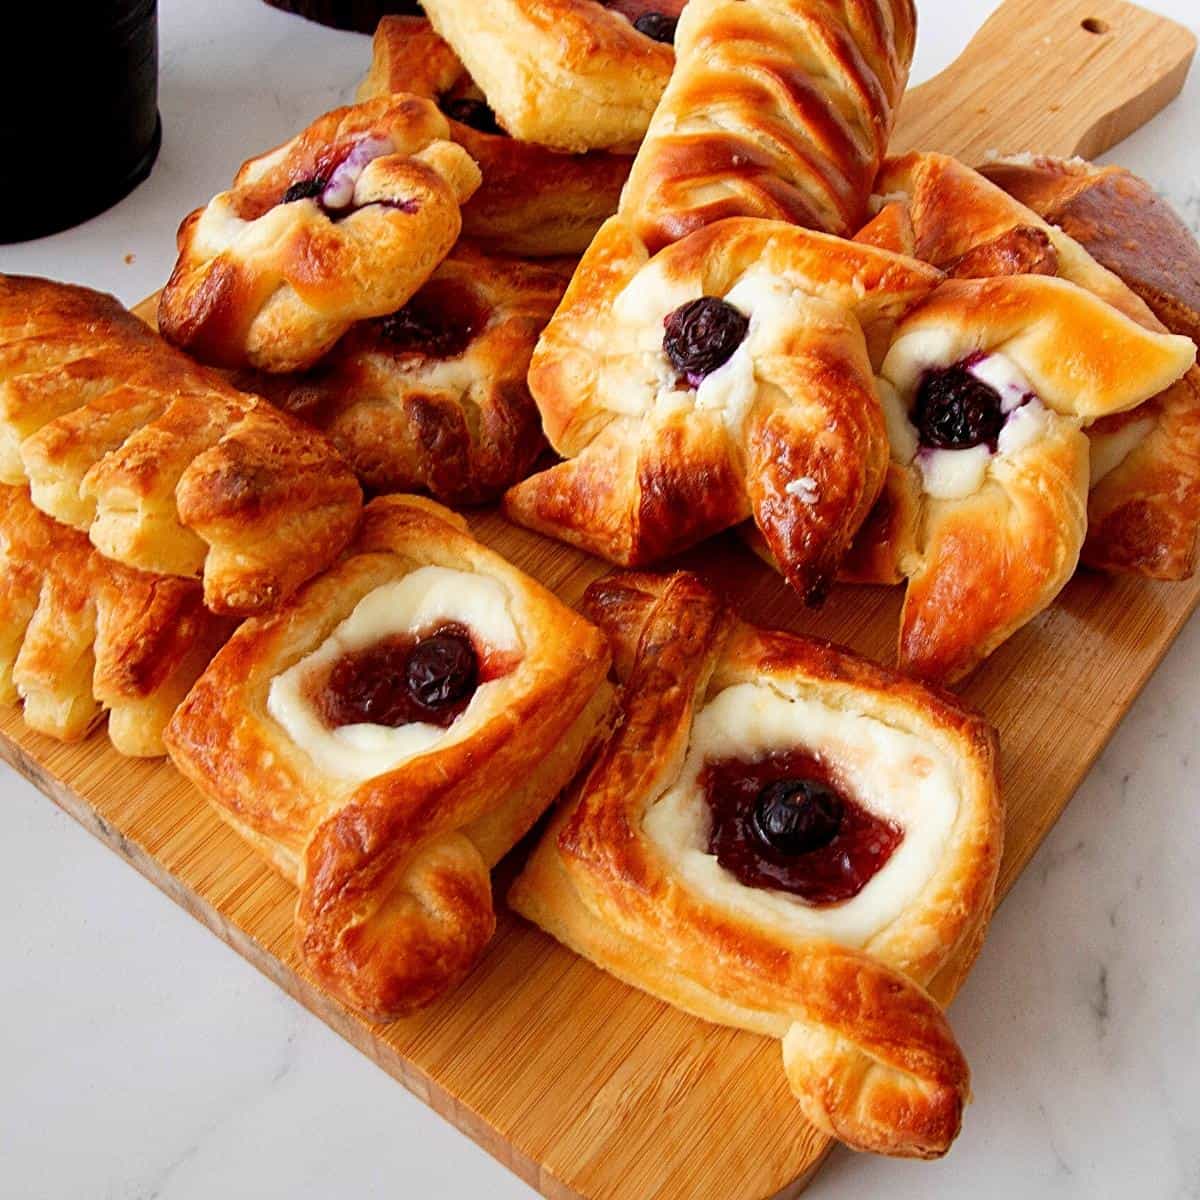 Danish pastries on a wooden board.